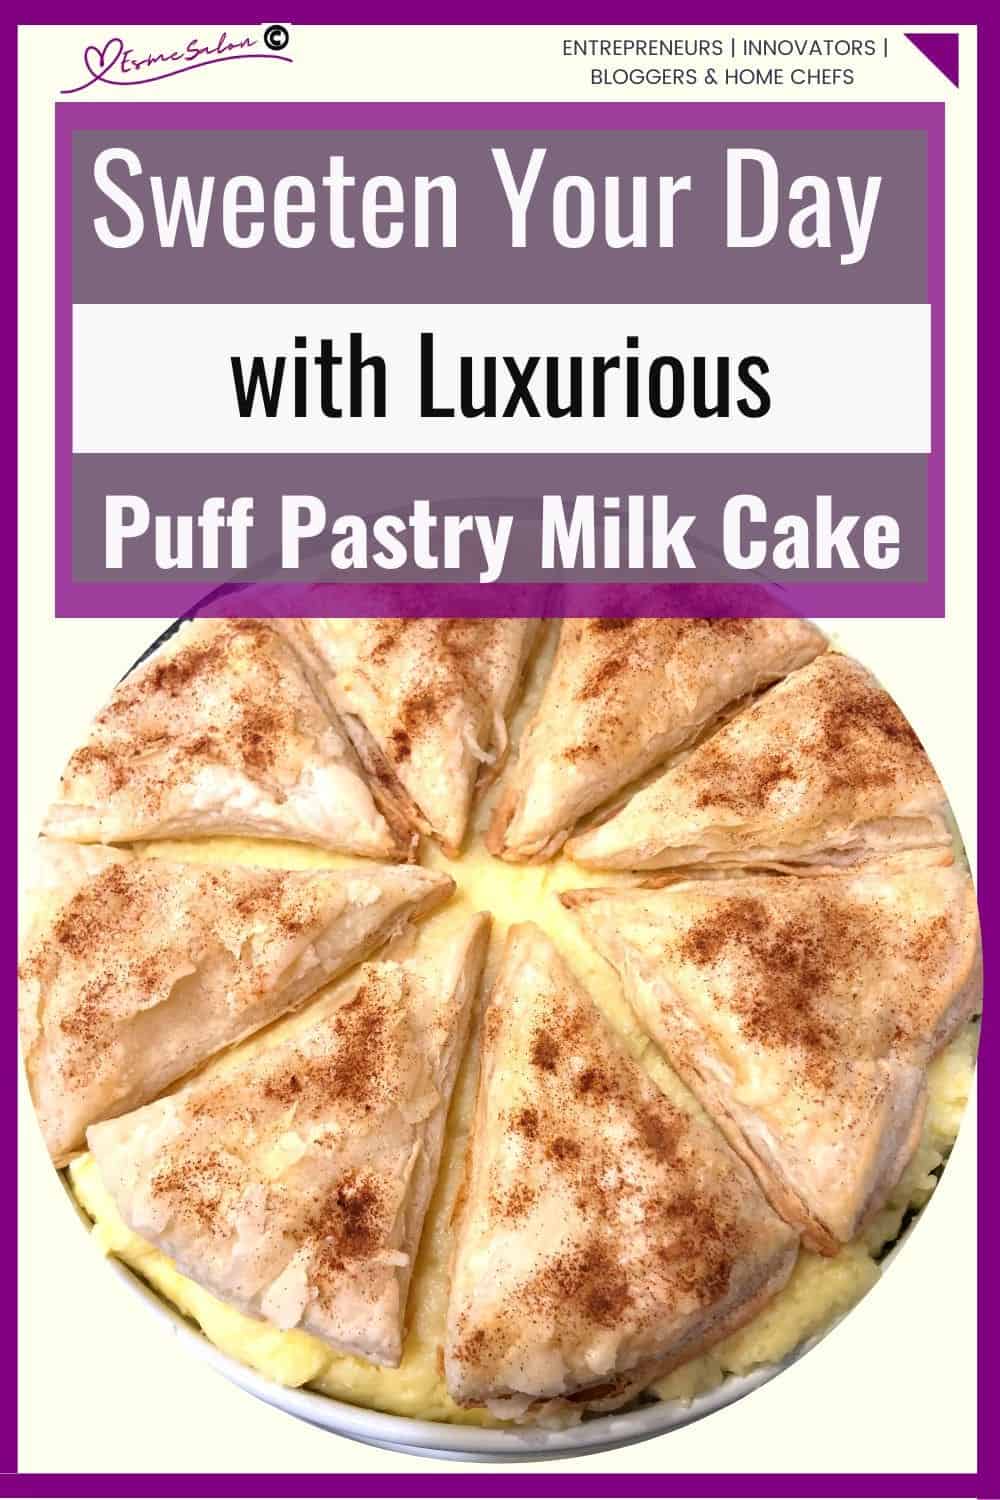 an image of an entire Puff Pastry Milk Cake